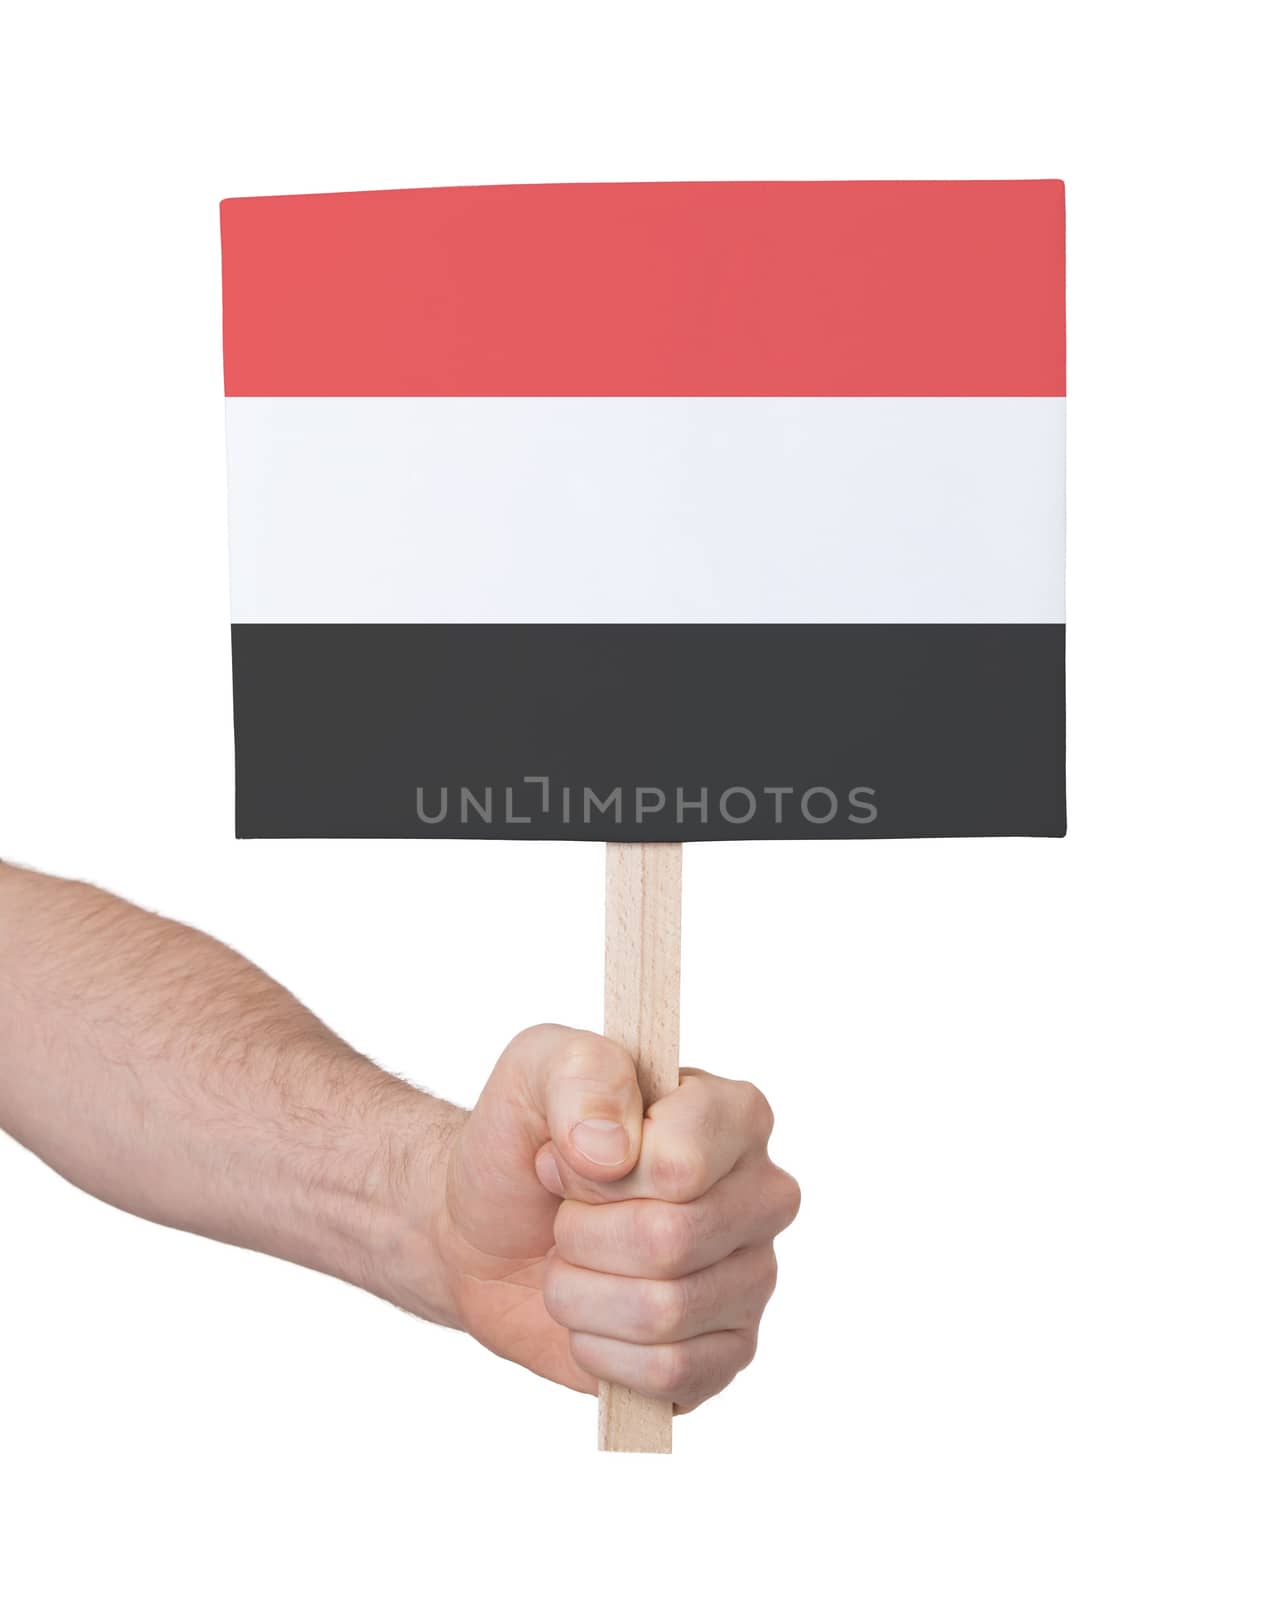 Hand holding small card, isolated on white - Flag of Yemen